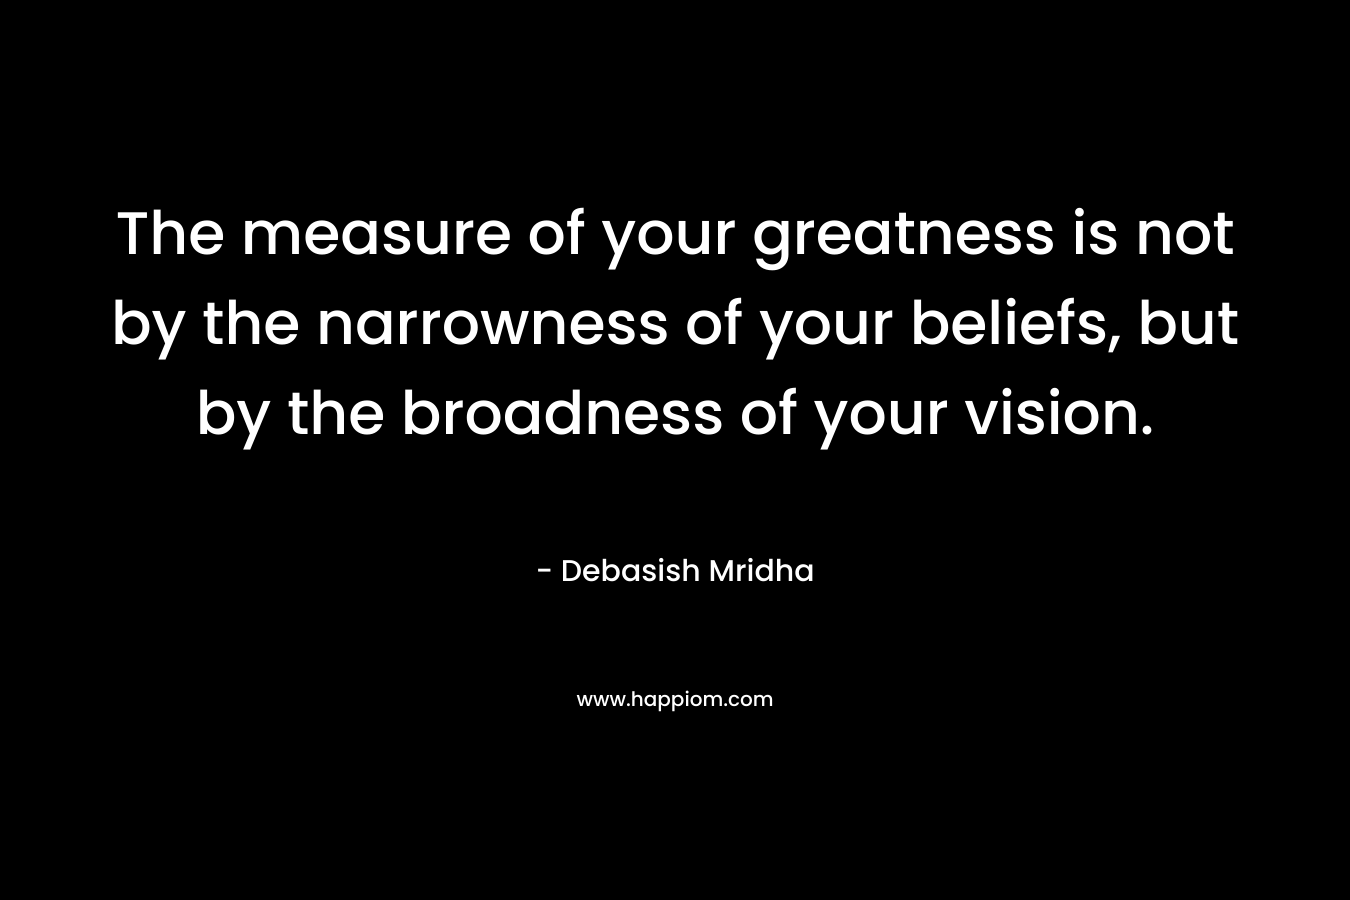 The measure of your greatness is not by the narrowness of your beliefs, but by the broadness of your vision.